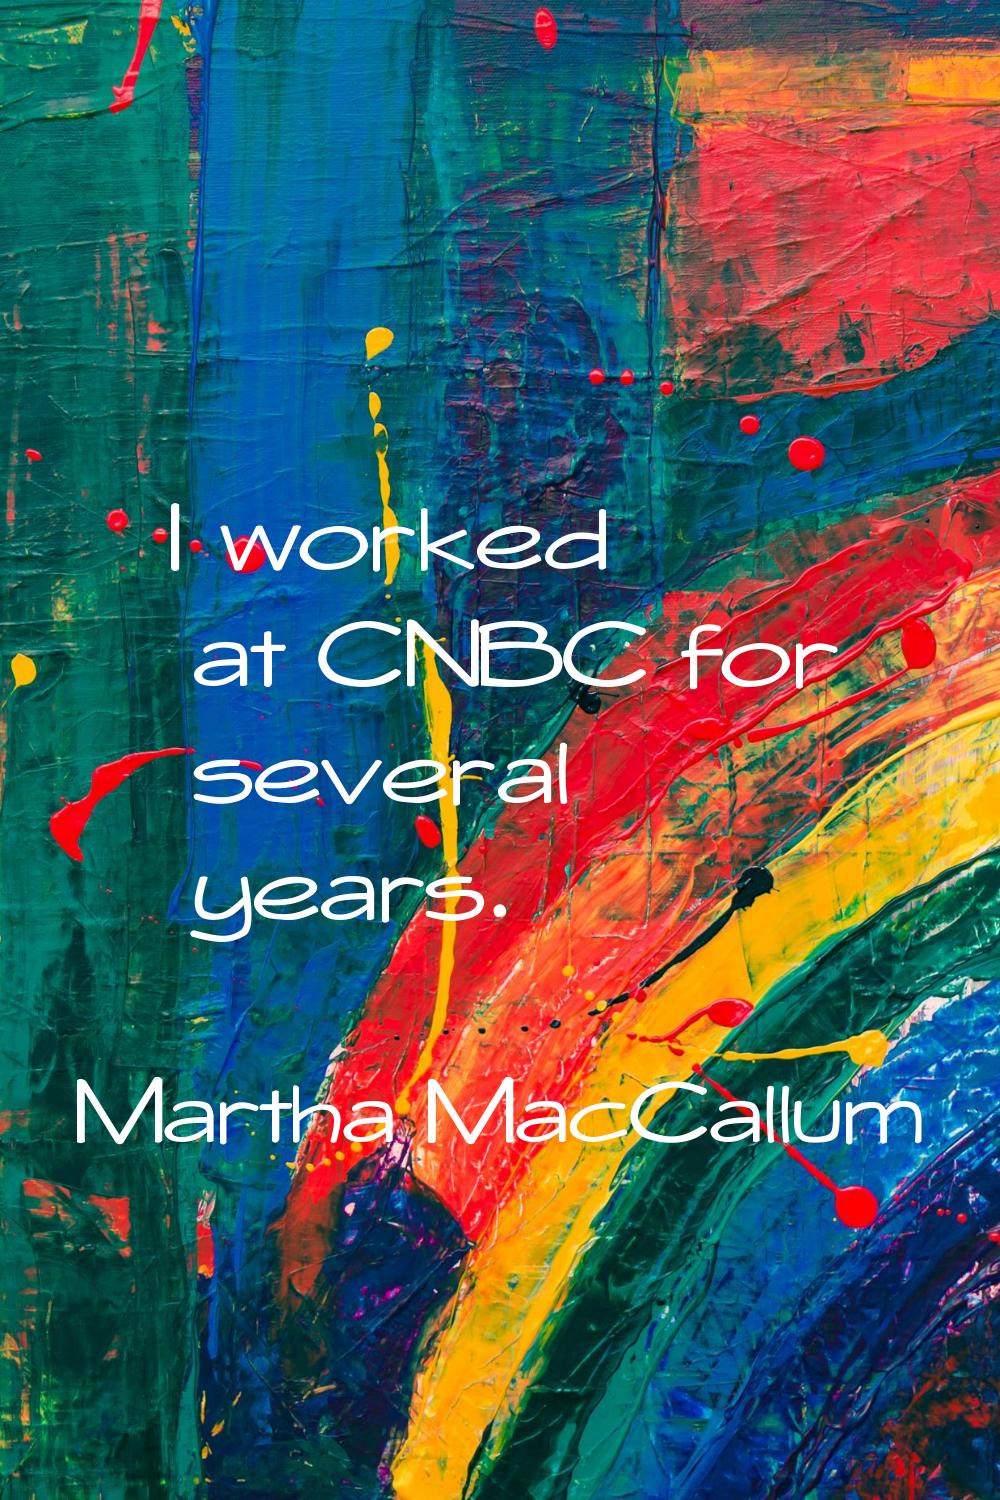 I worked at CNBC for several years.